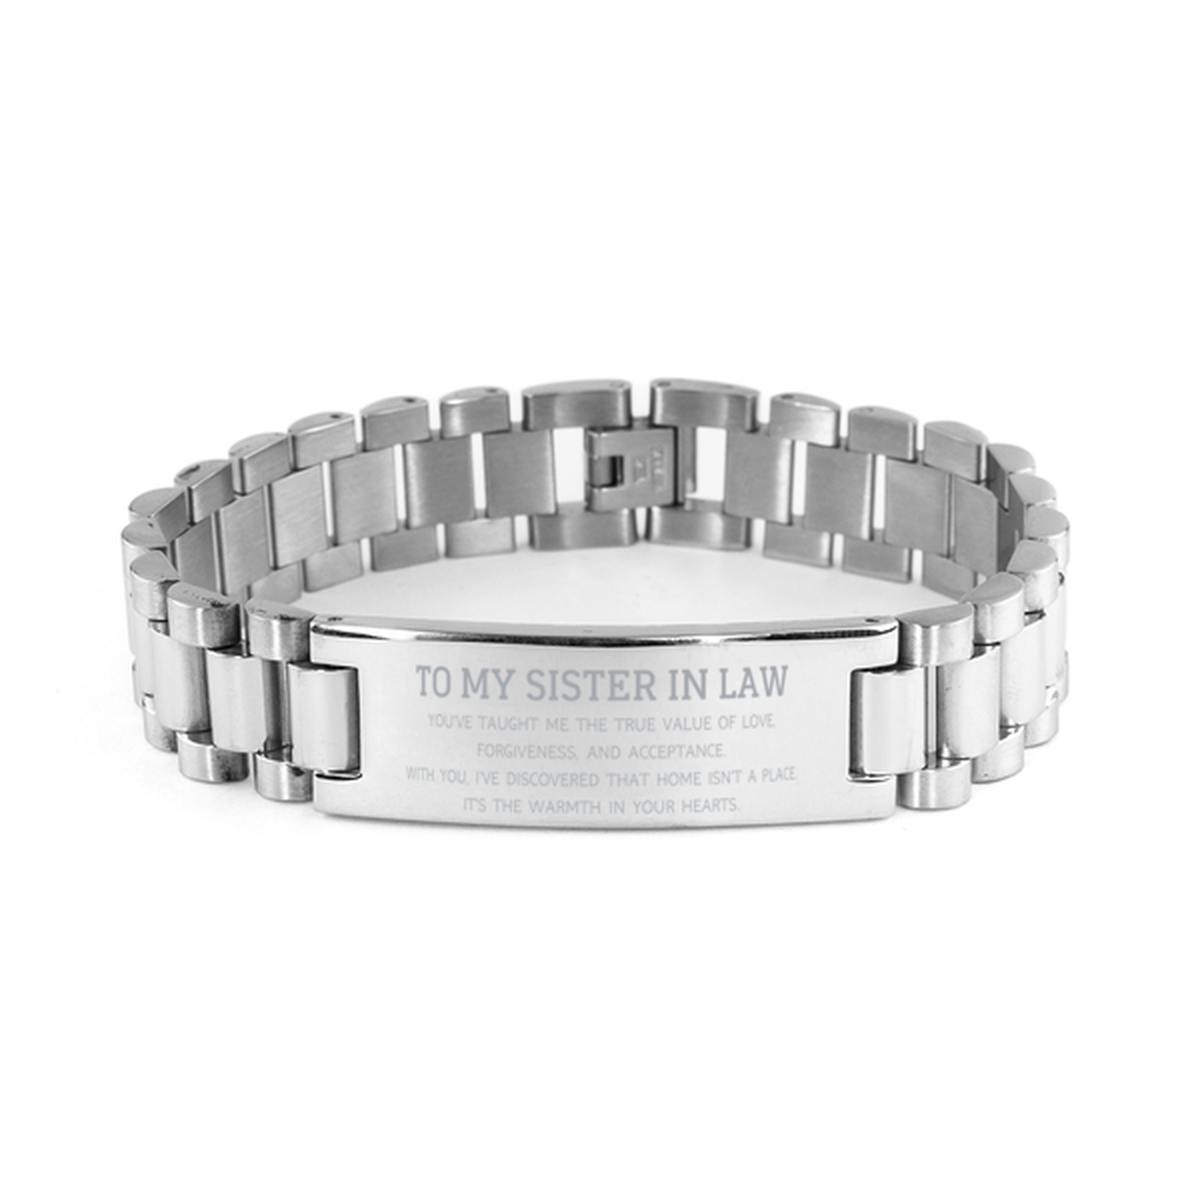 To My Sister In Law Gifts, You've taught me the true value of love, Thank You Gifts For Sister In Law, Birthday Ladder Stainless Steel Bracelet For Sister In Law